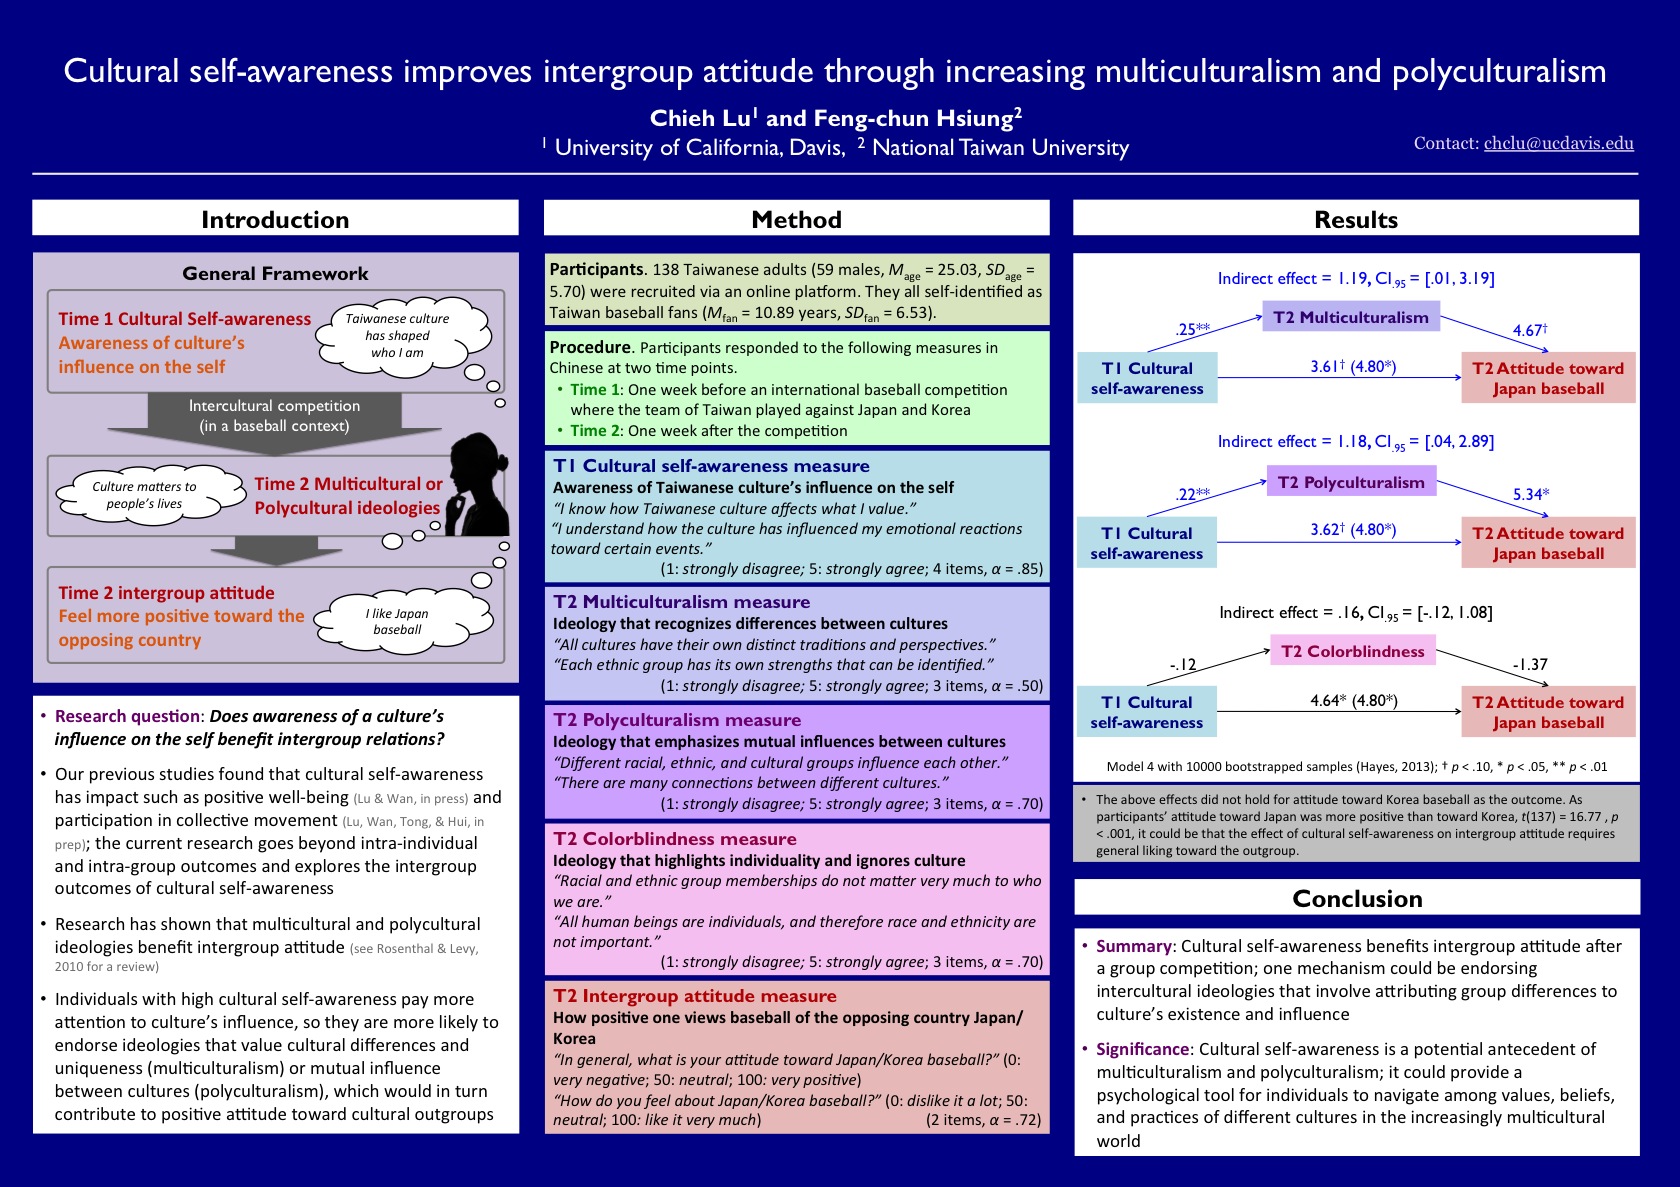 Lu & Hsiung 2018_APS poster